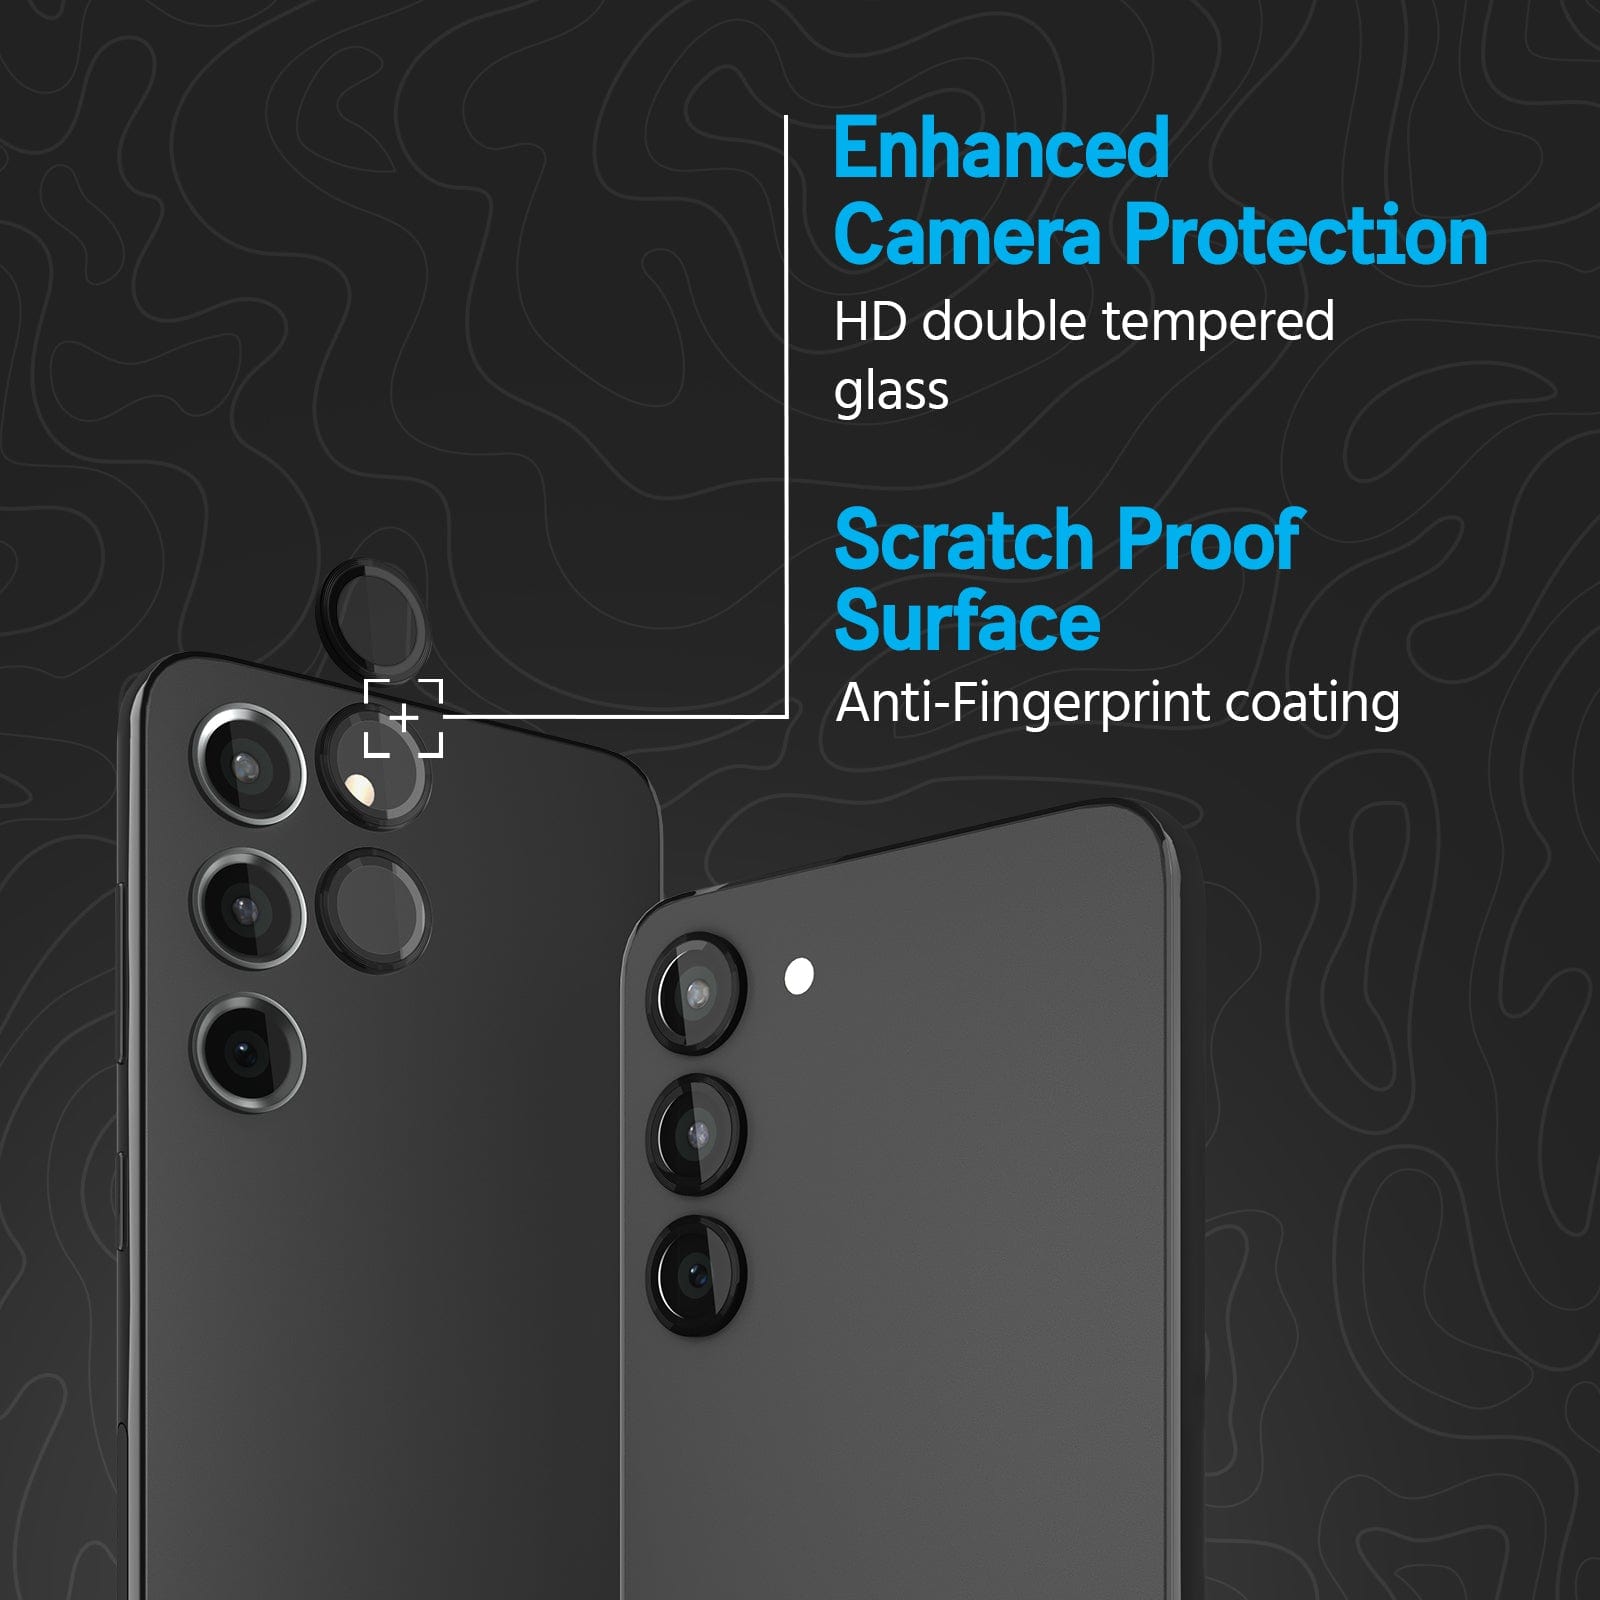 ENHANCED CAMERA PROTECTION. HD DOUBLE TEMPERED GLASS. SCRATCH PROOF SURFACE. ANTI-FINGERPRINT COATING.